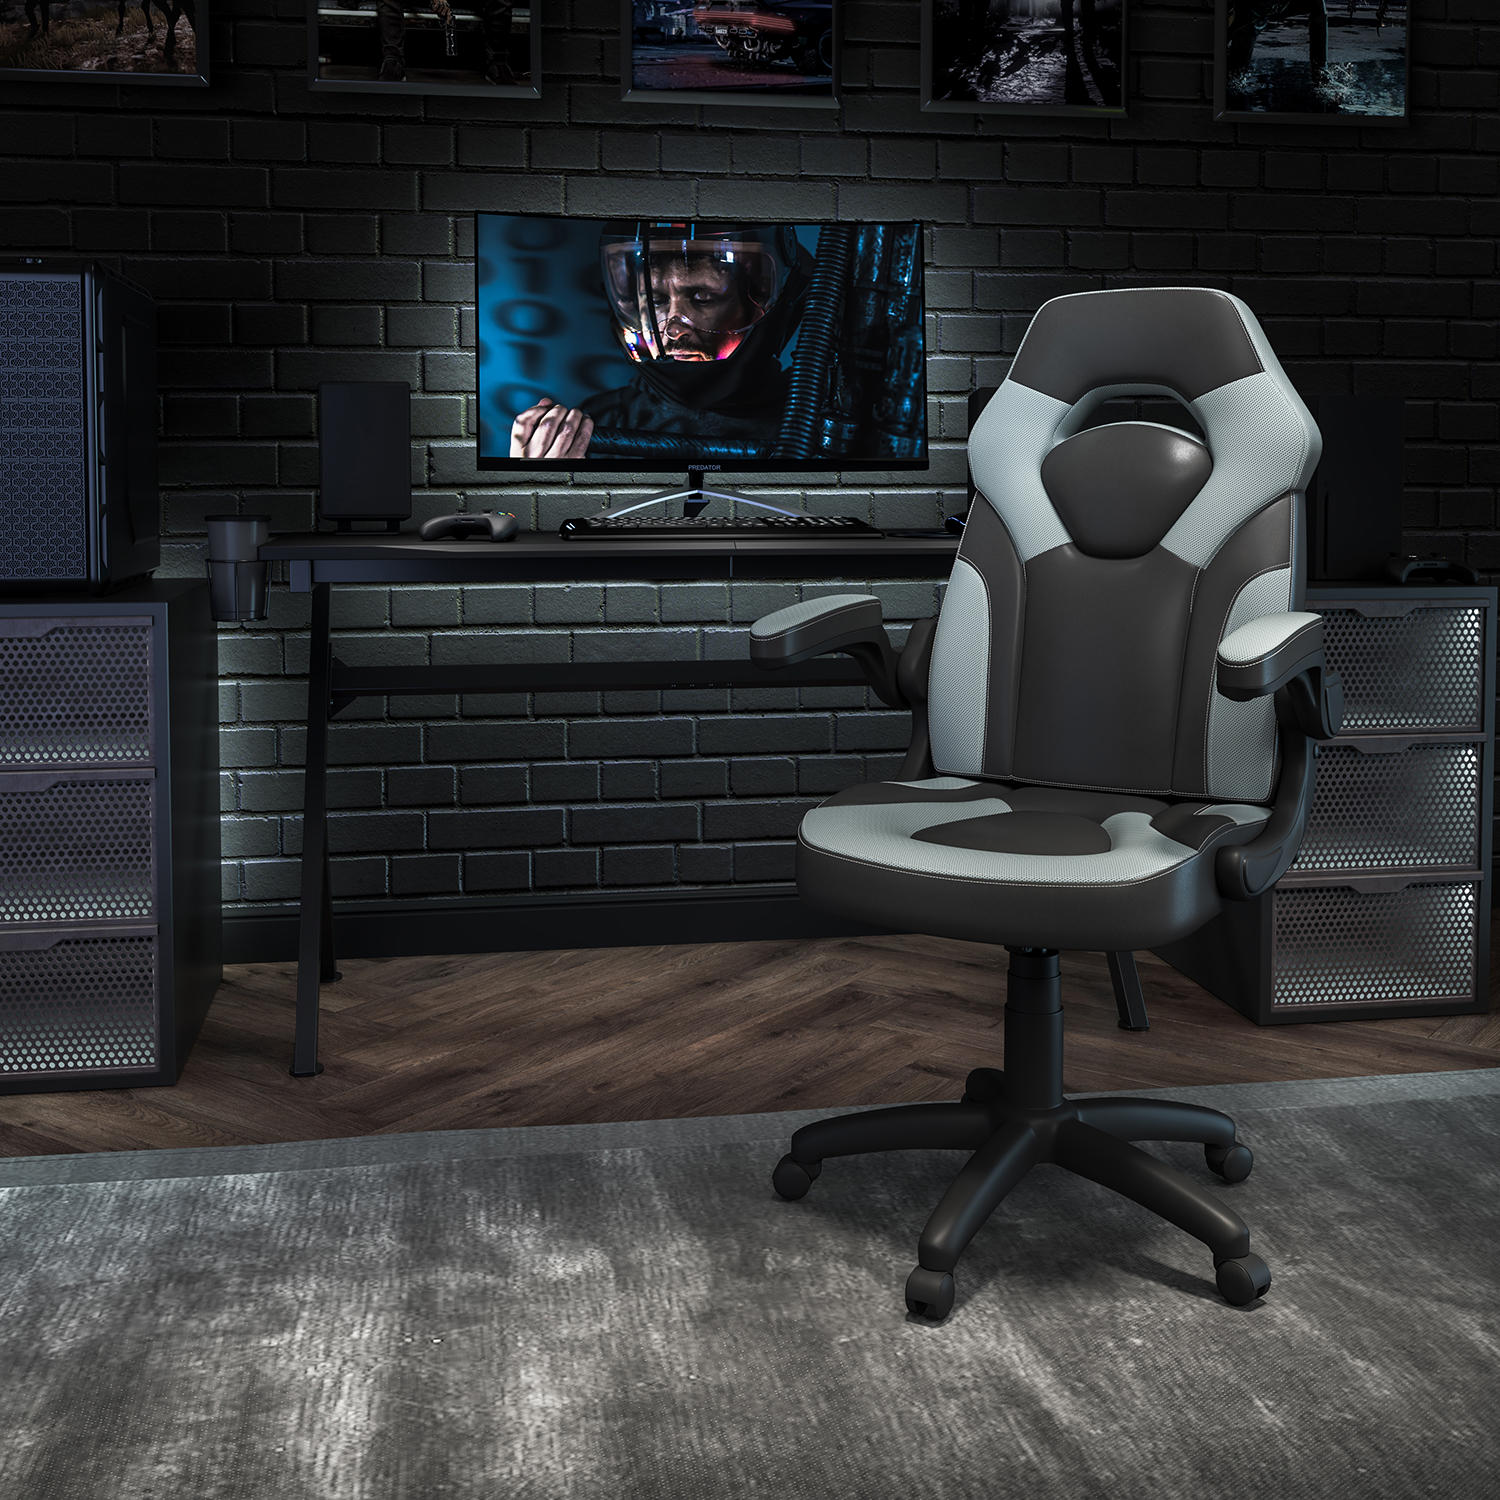 X10 Gaming Chair Racing Office Ergonomic Computer PC Adjustable Swivel Chair with Flip-up Arms, Gray/Black LeatherSoft